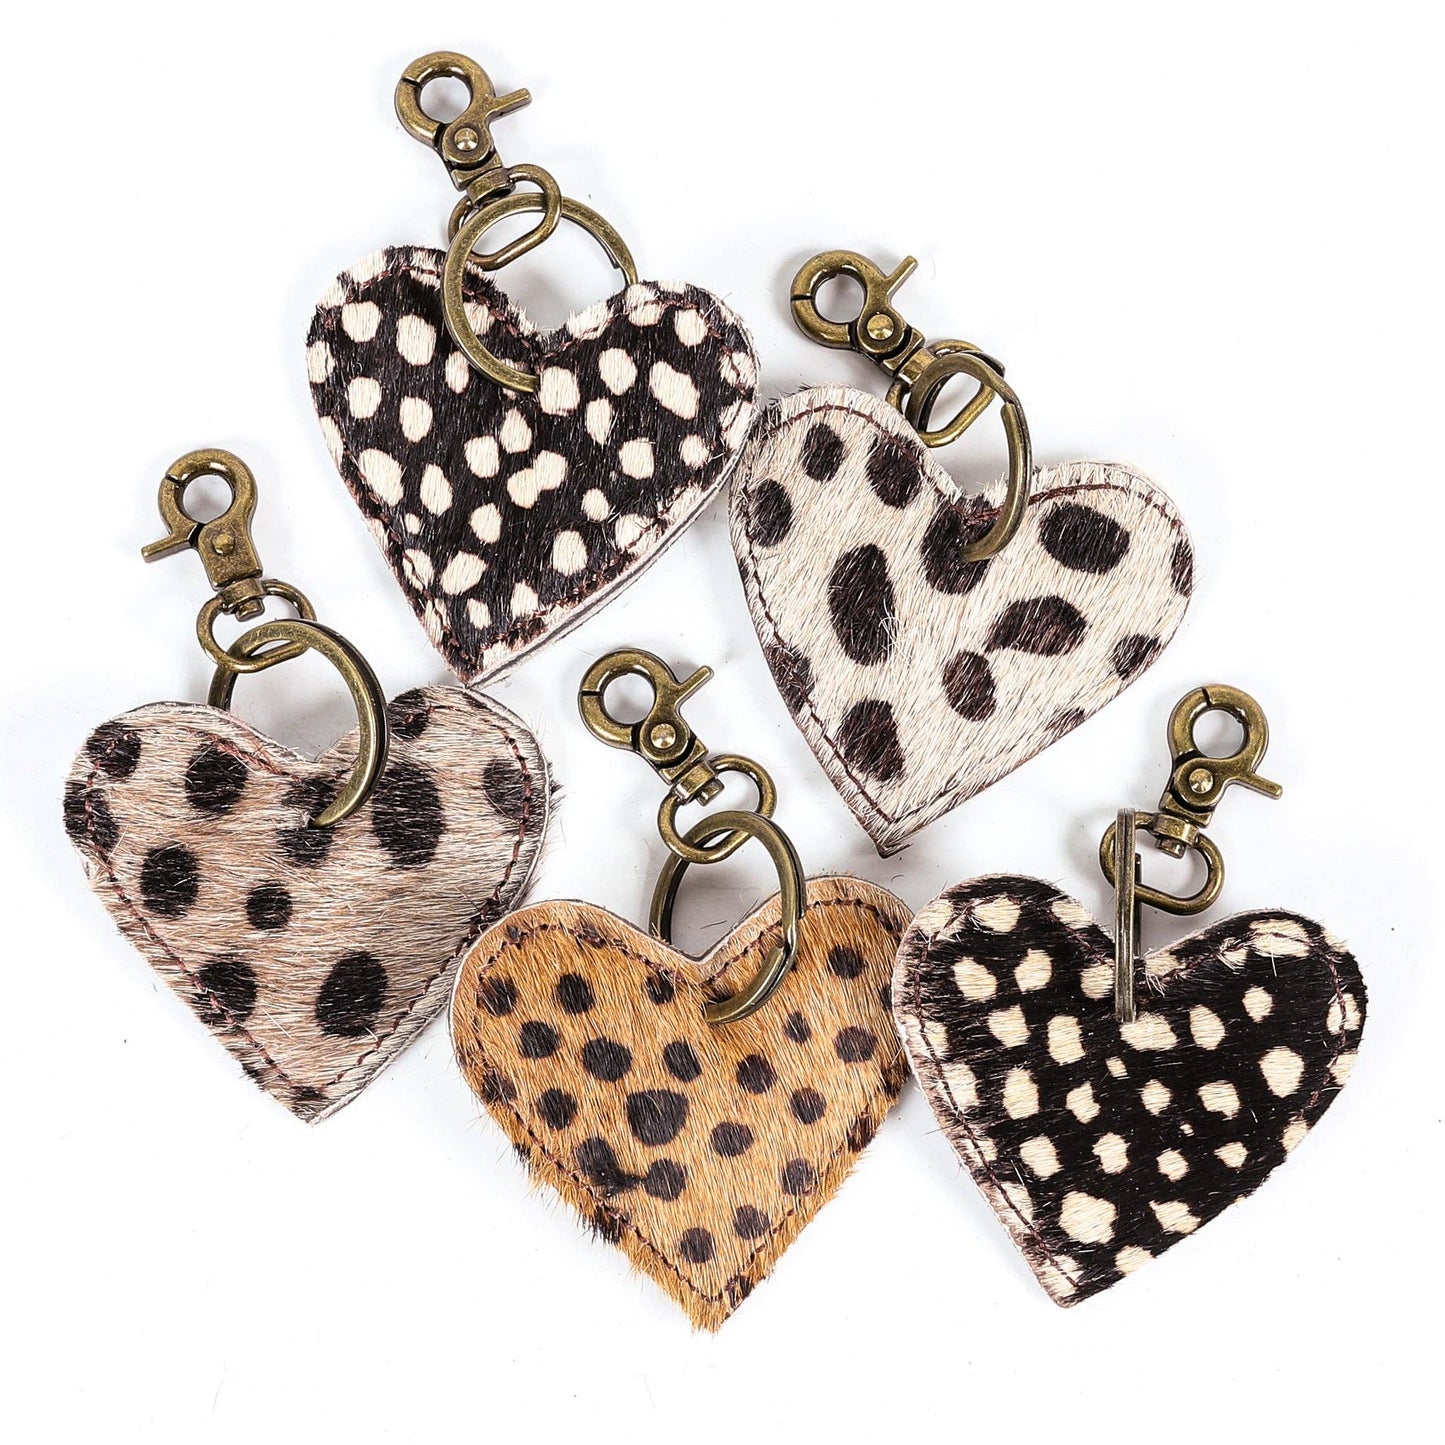 Wild Heart Cowhide Keychains - Pack of 3